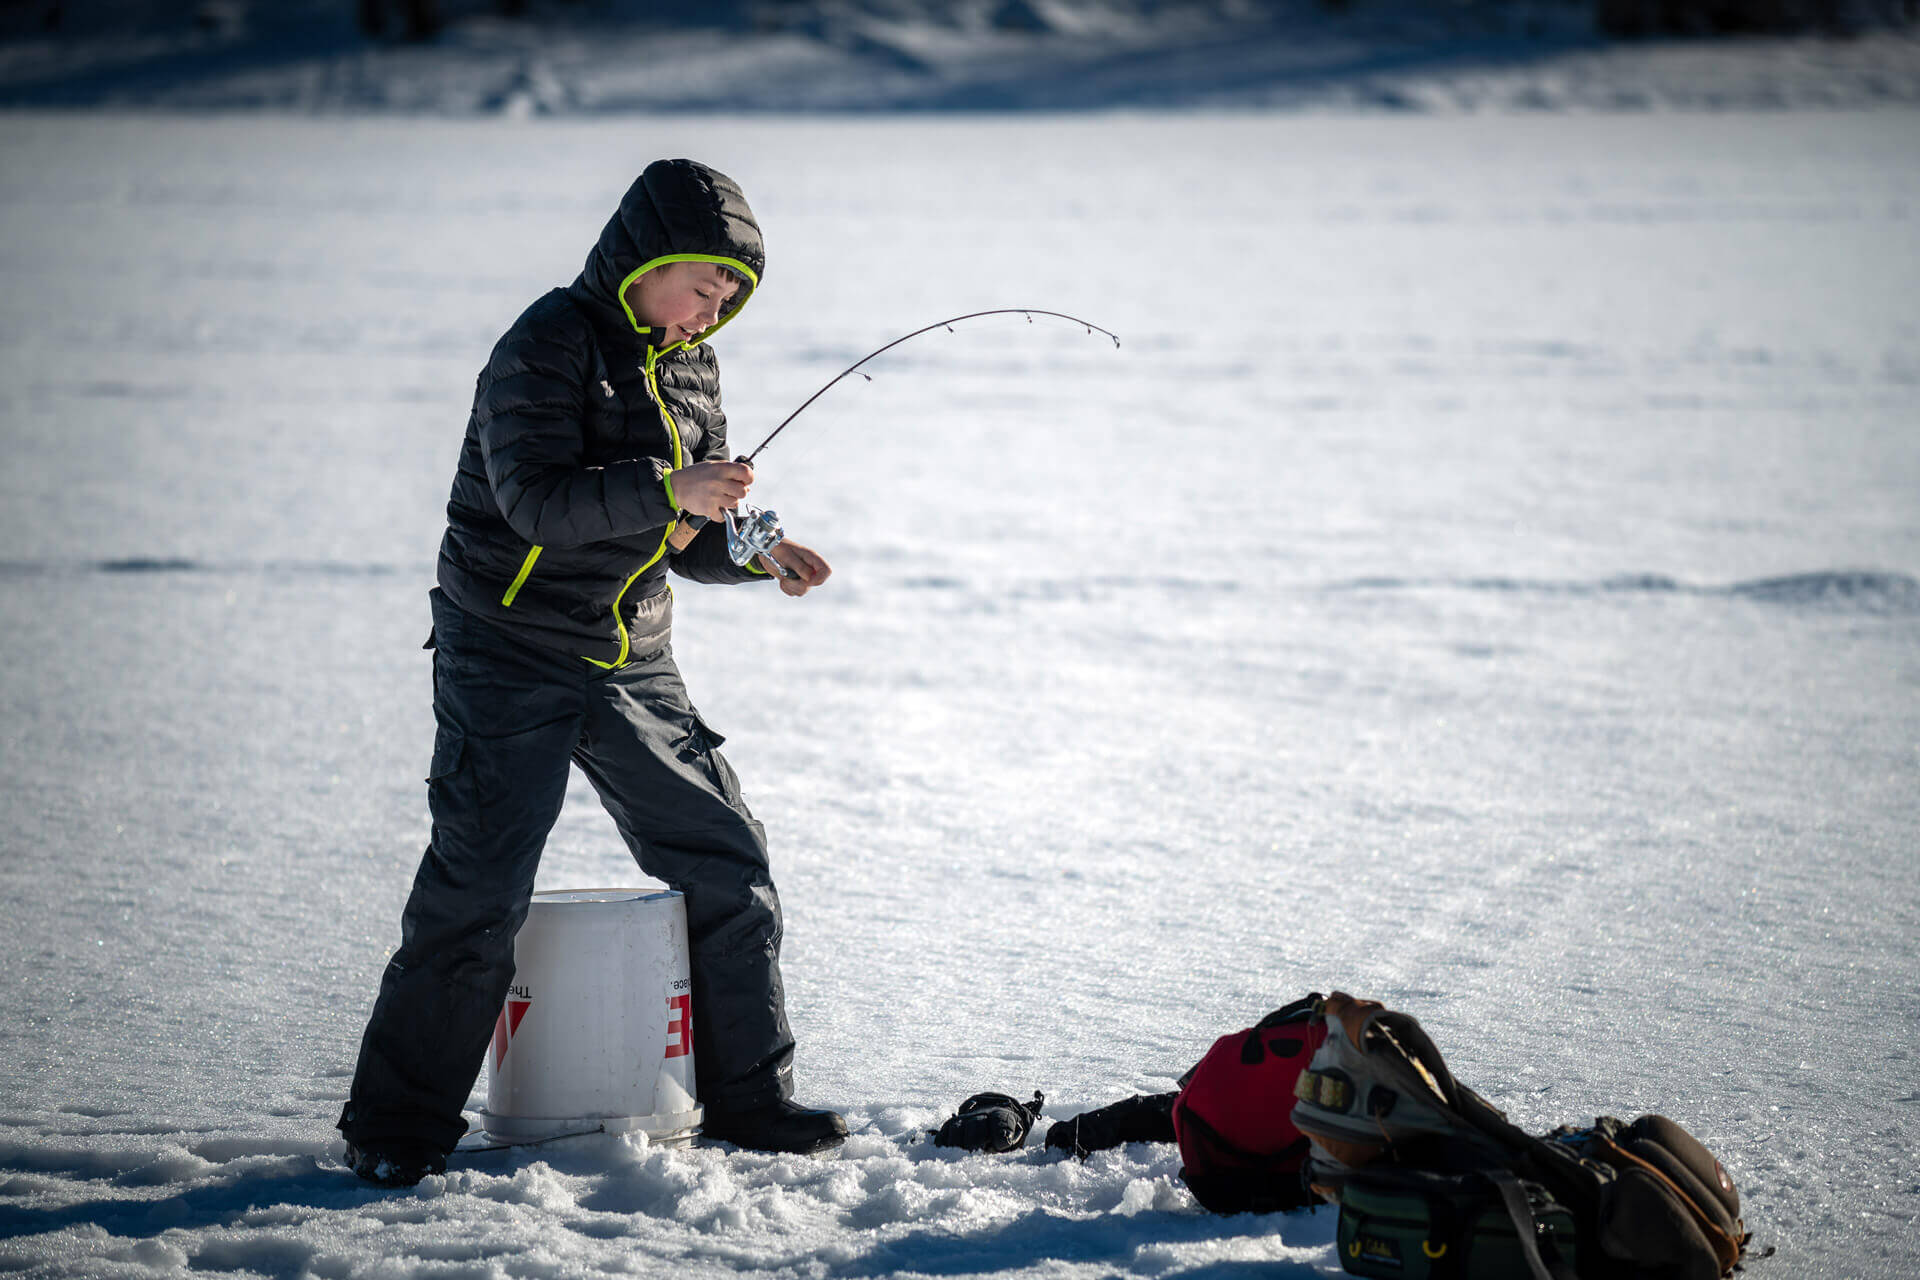 A boy reels in a fish through a whole in a frozen lake during winter in Washington